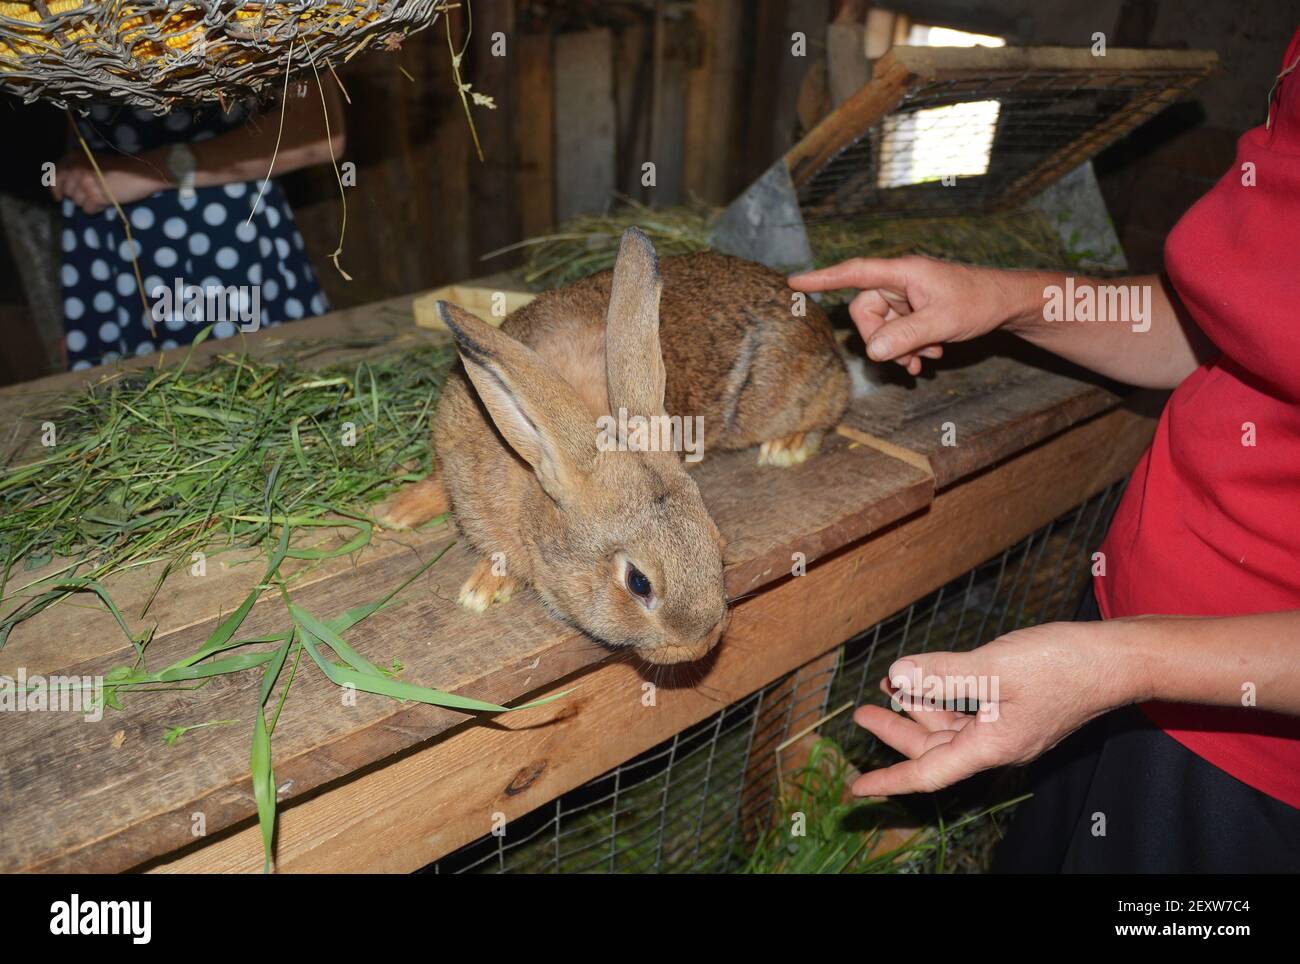 On the farm: The farmer who is growing rabbits for meat is showing a young gray brown rabbit on a wooden rabbit hutch. Stock Photo